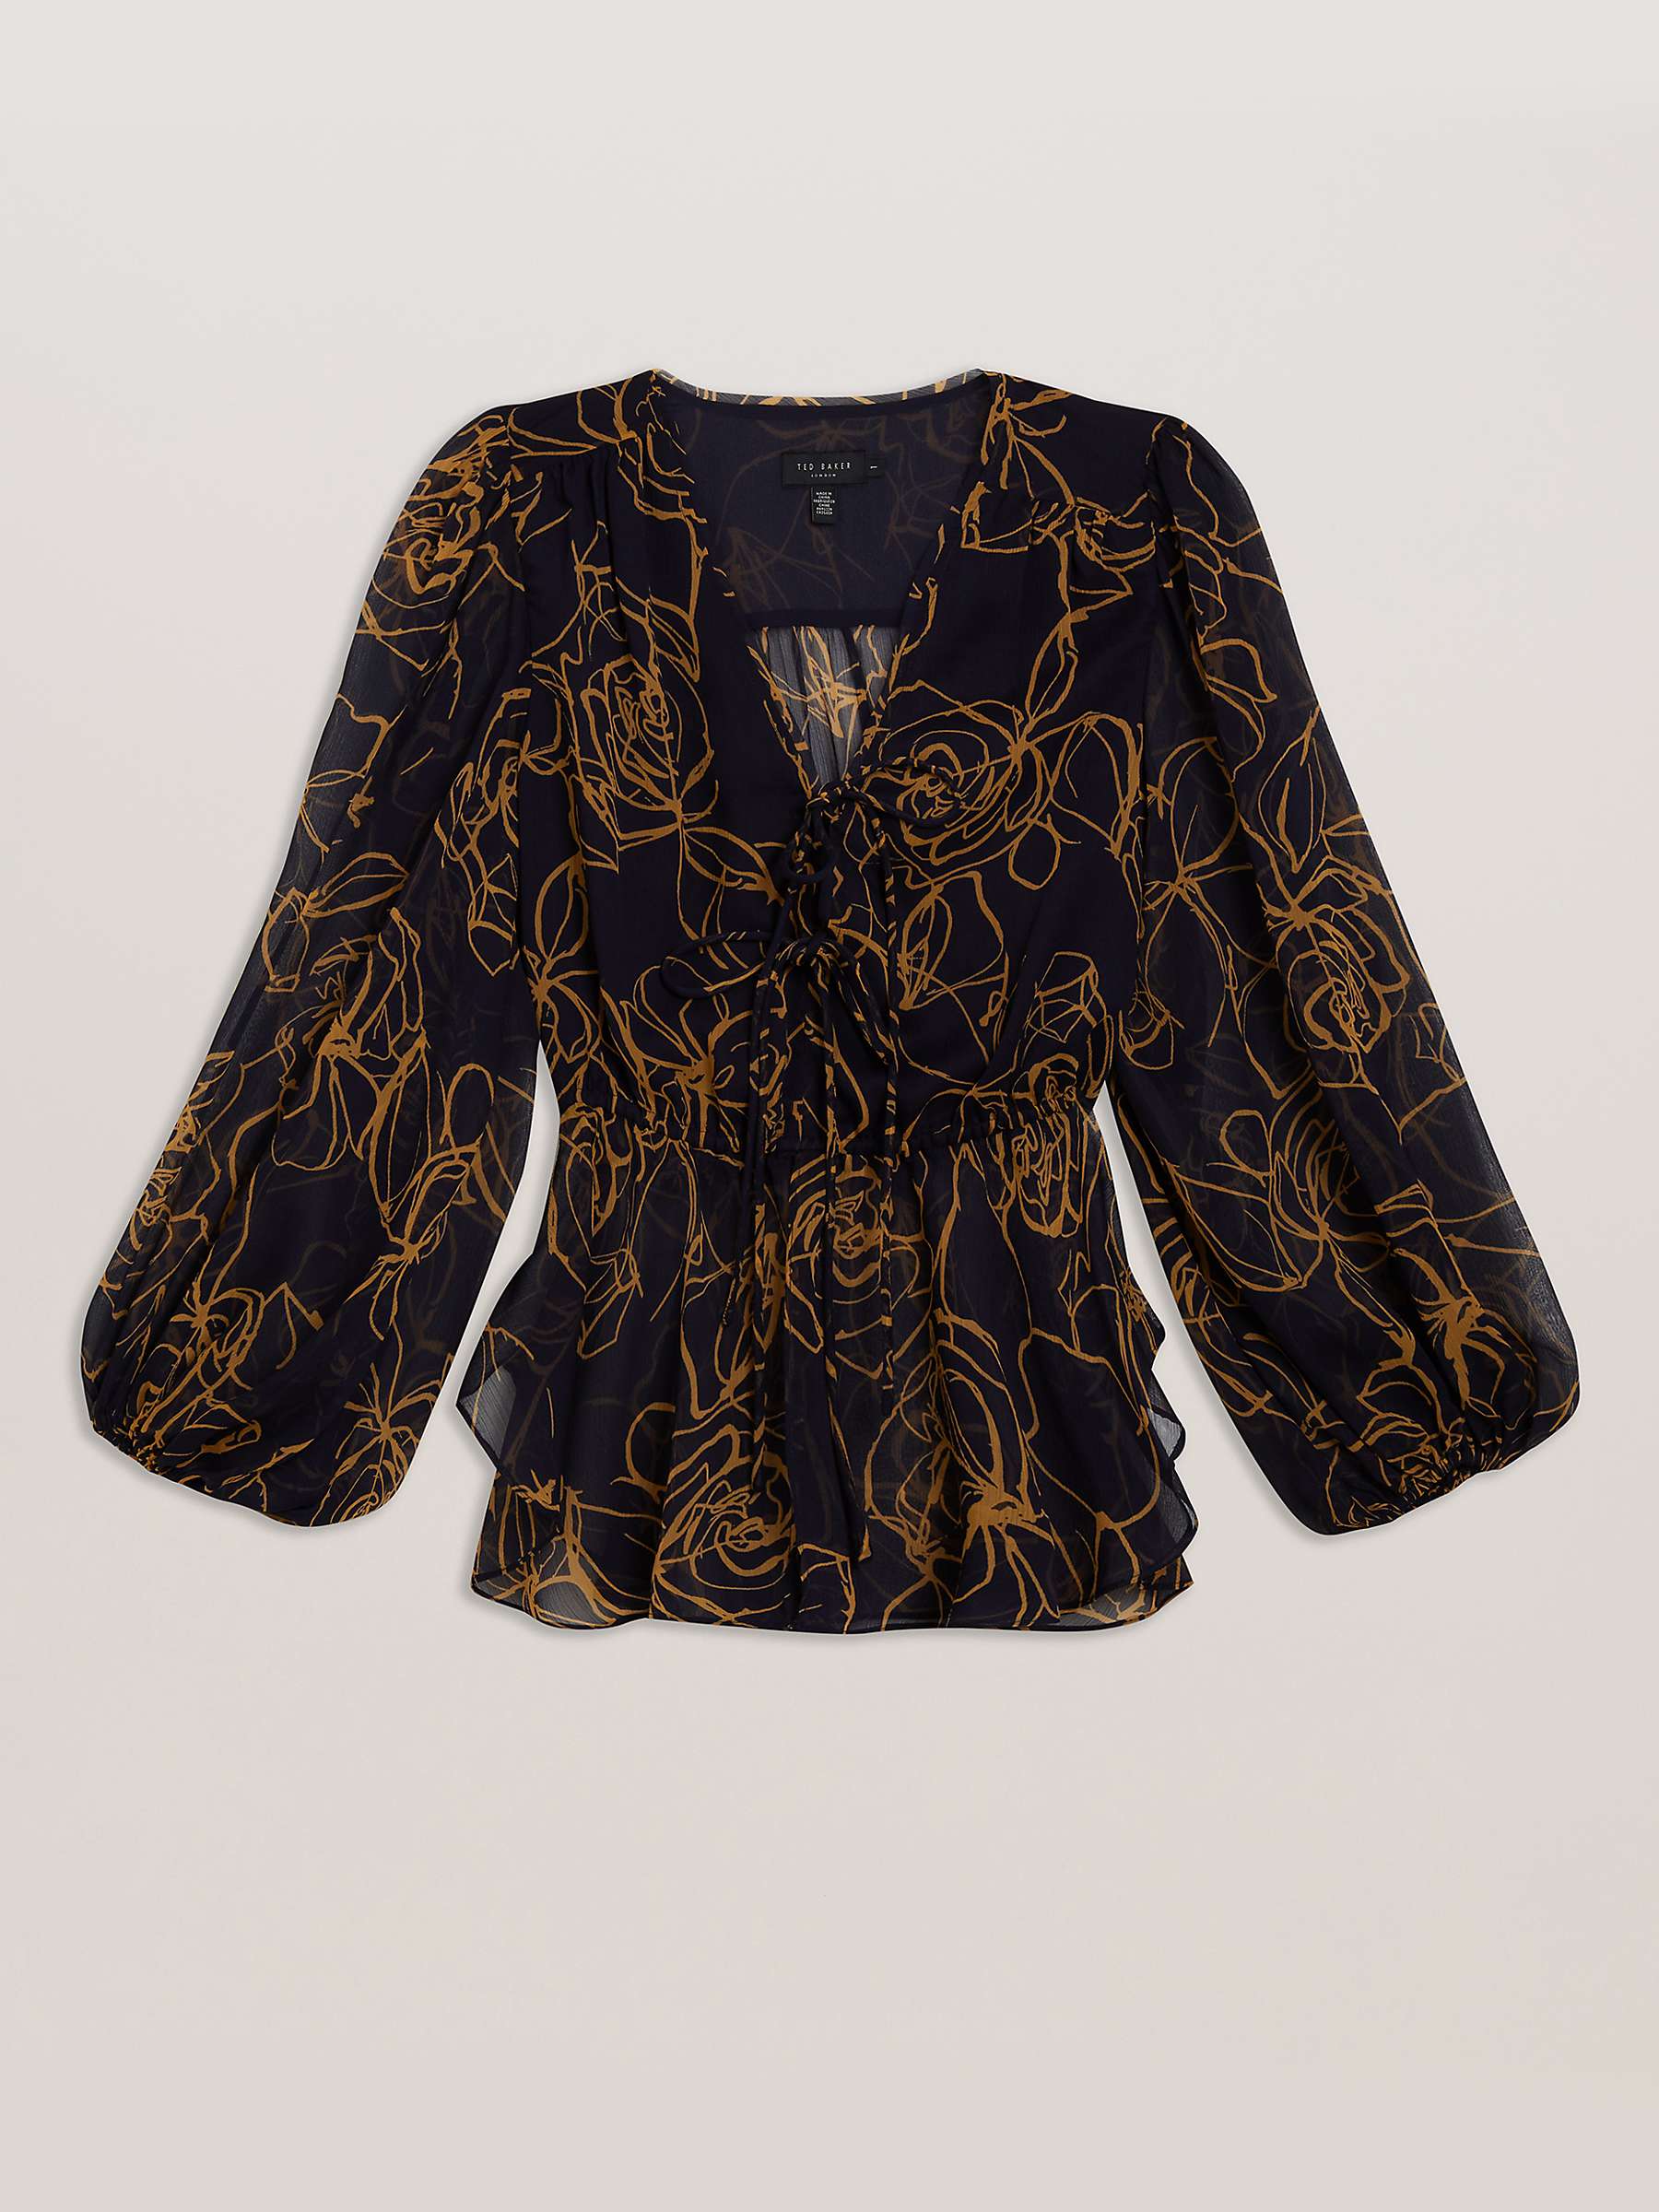 Buy Ted Baker Kazuko Abstract Floral Print Peplum Blouse, Navy/Multi Online at johnlewis.com